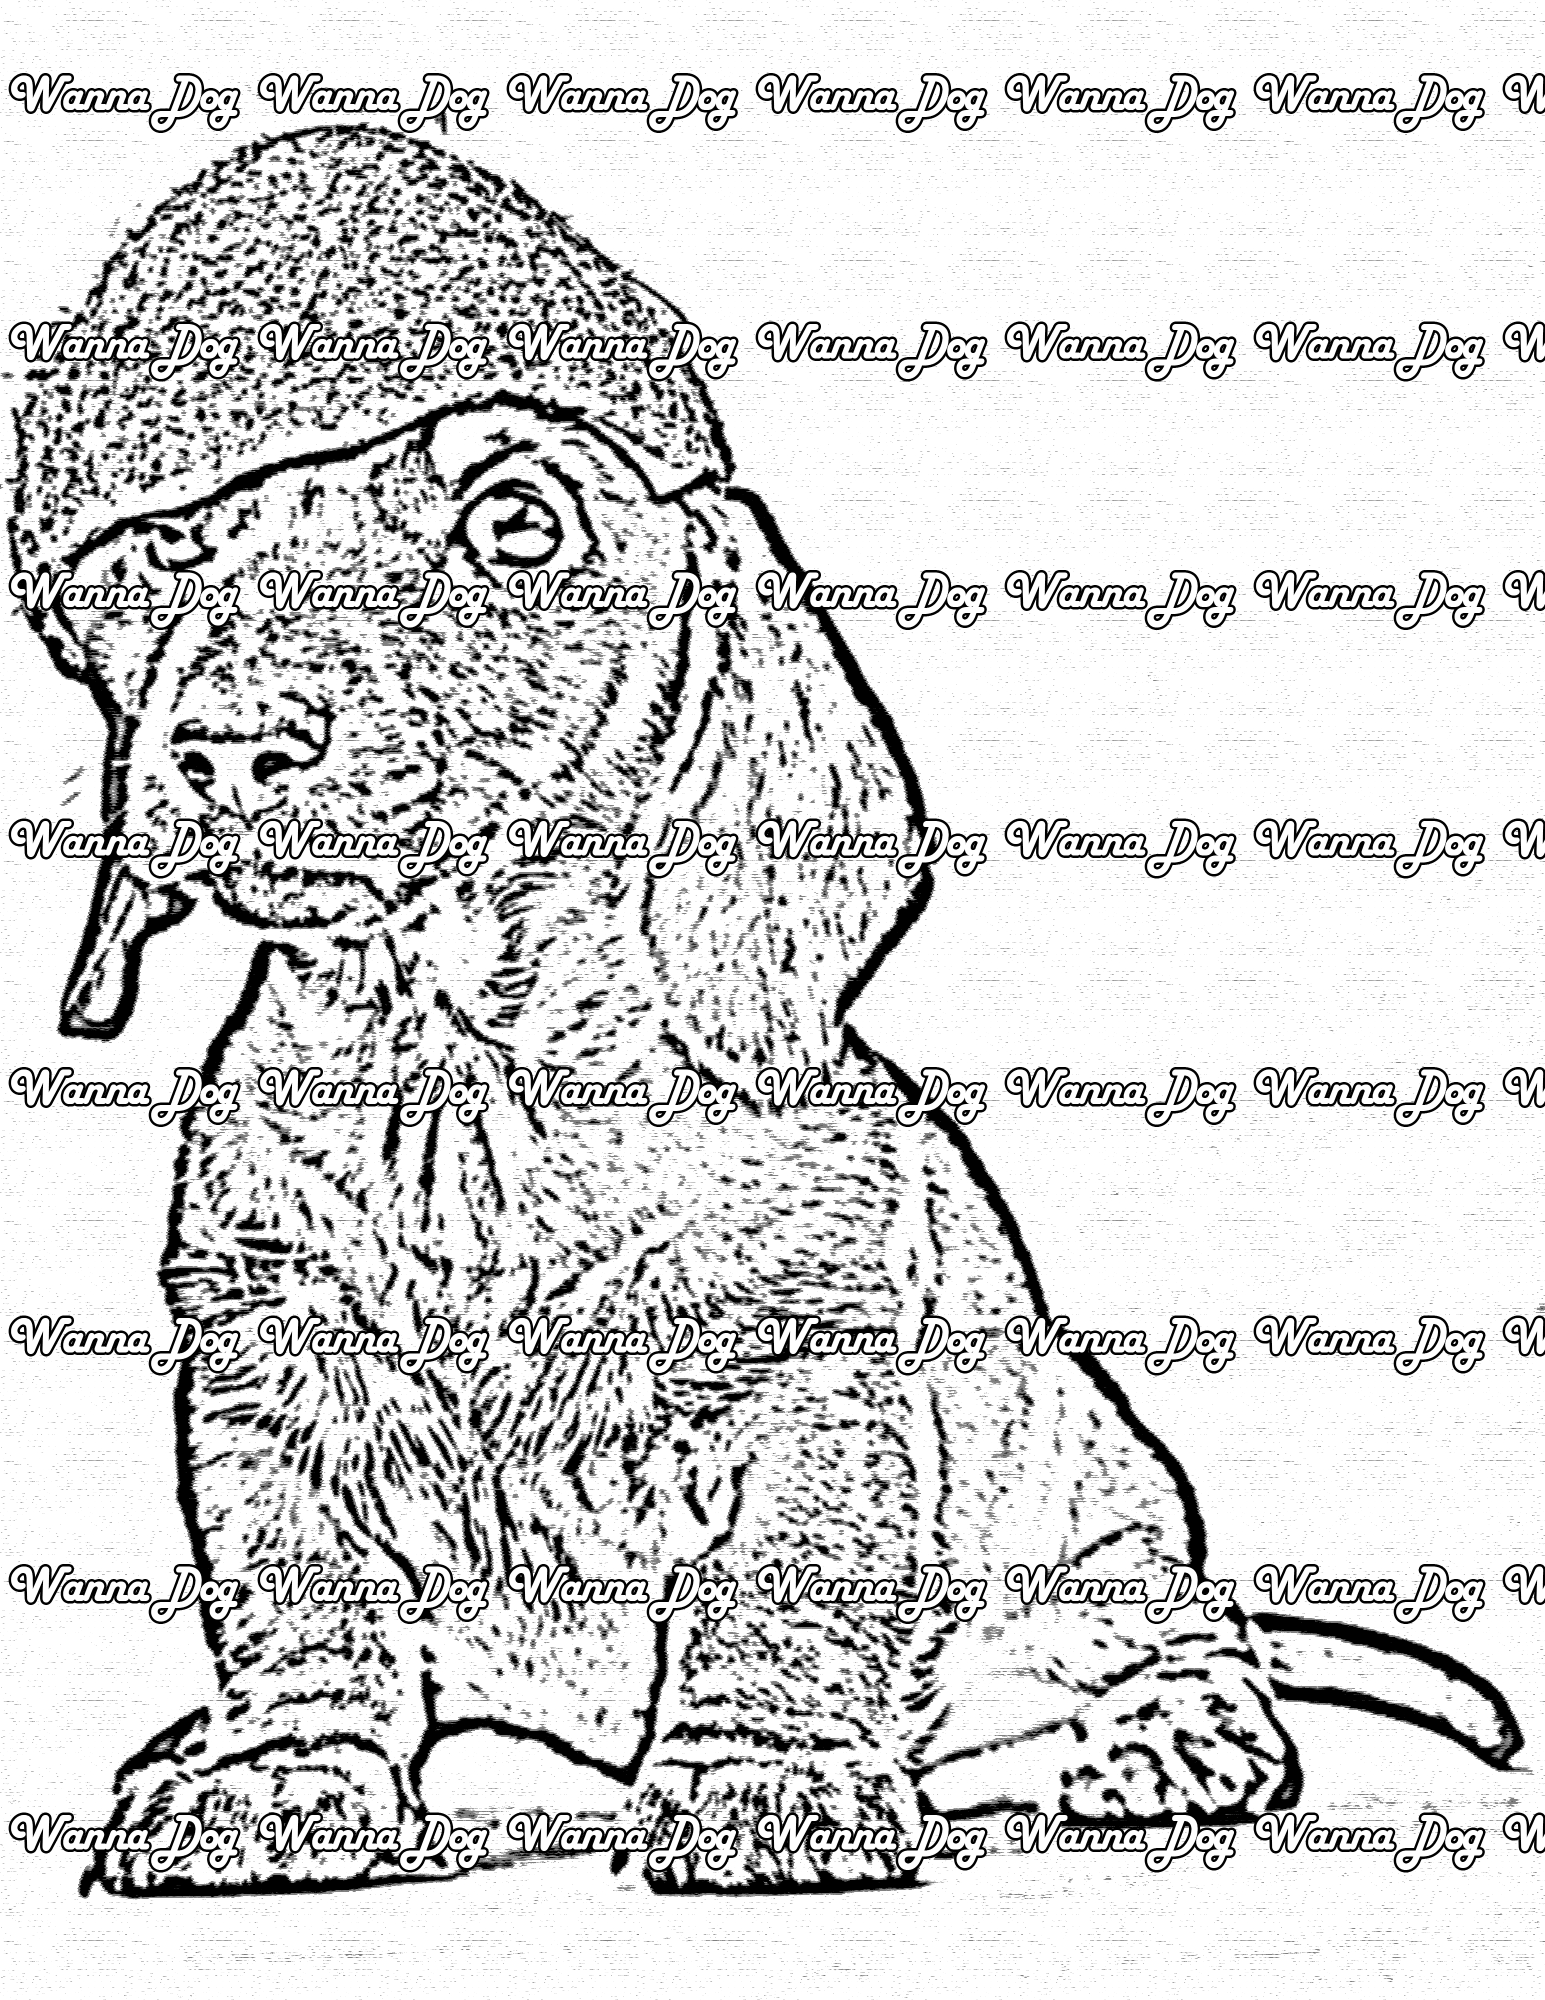 Dachshund Coloring Page of a Dachshund with a coconut